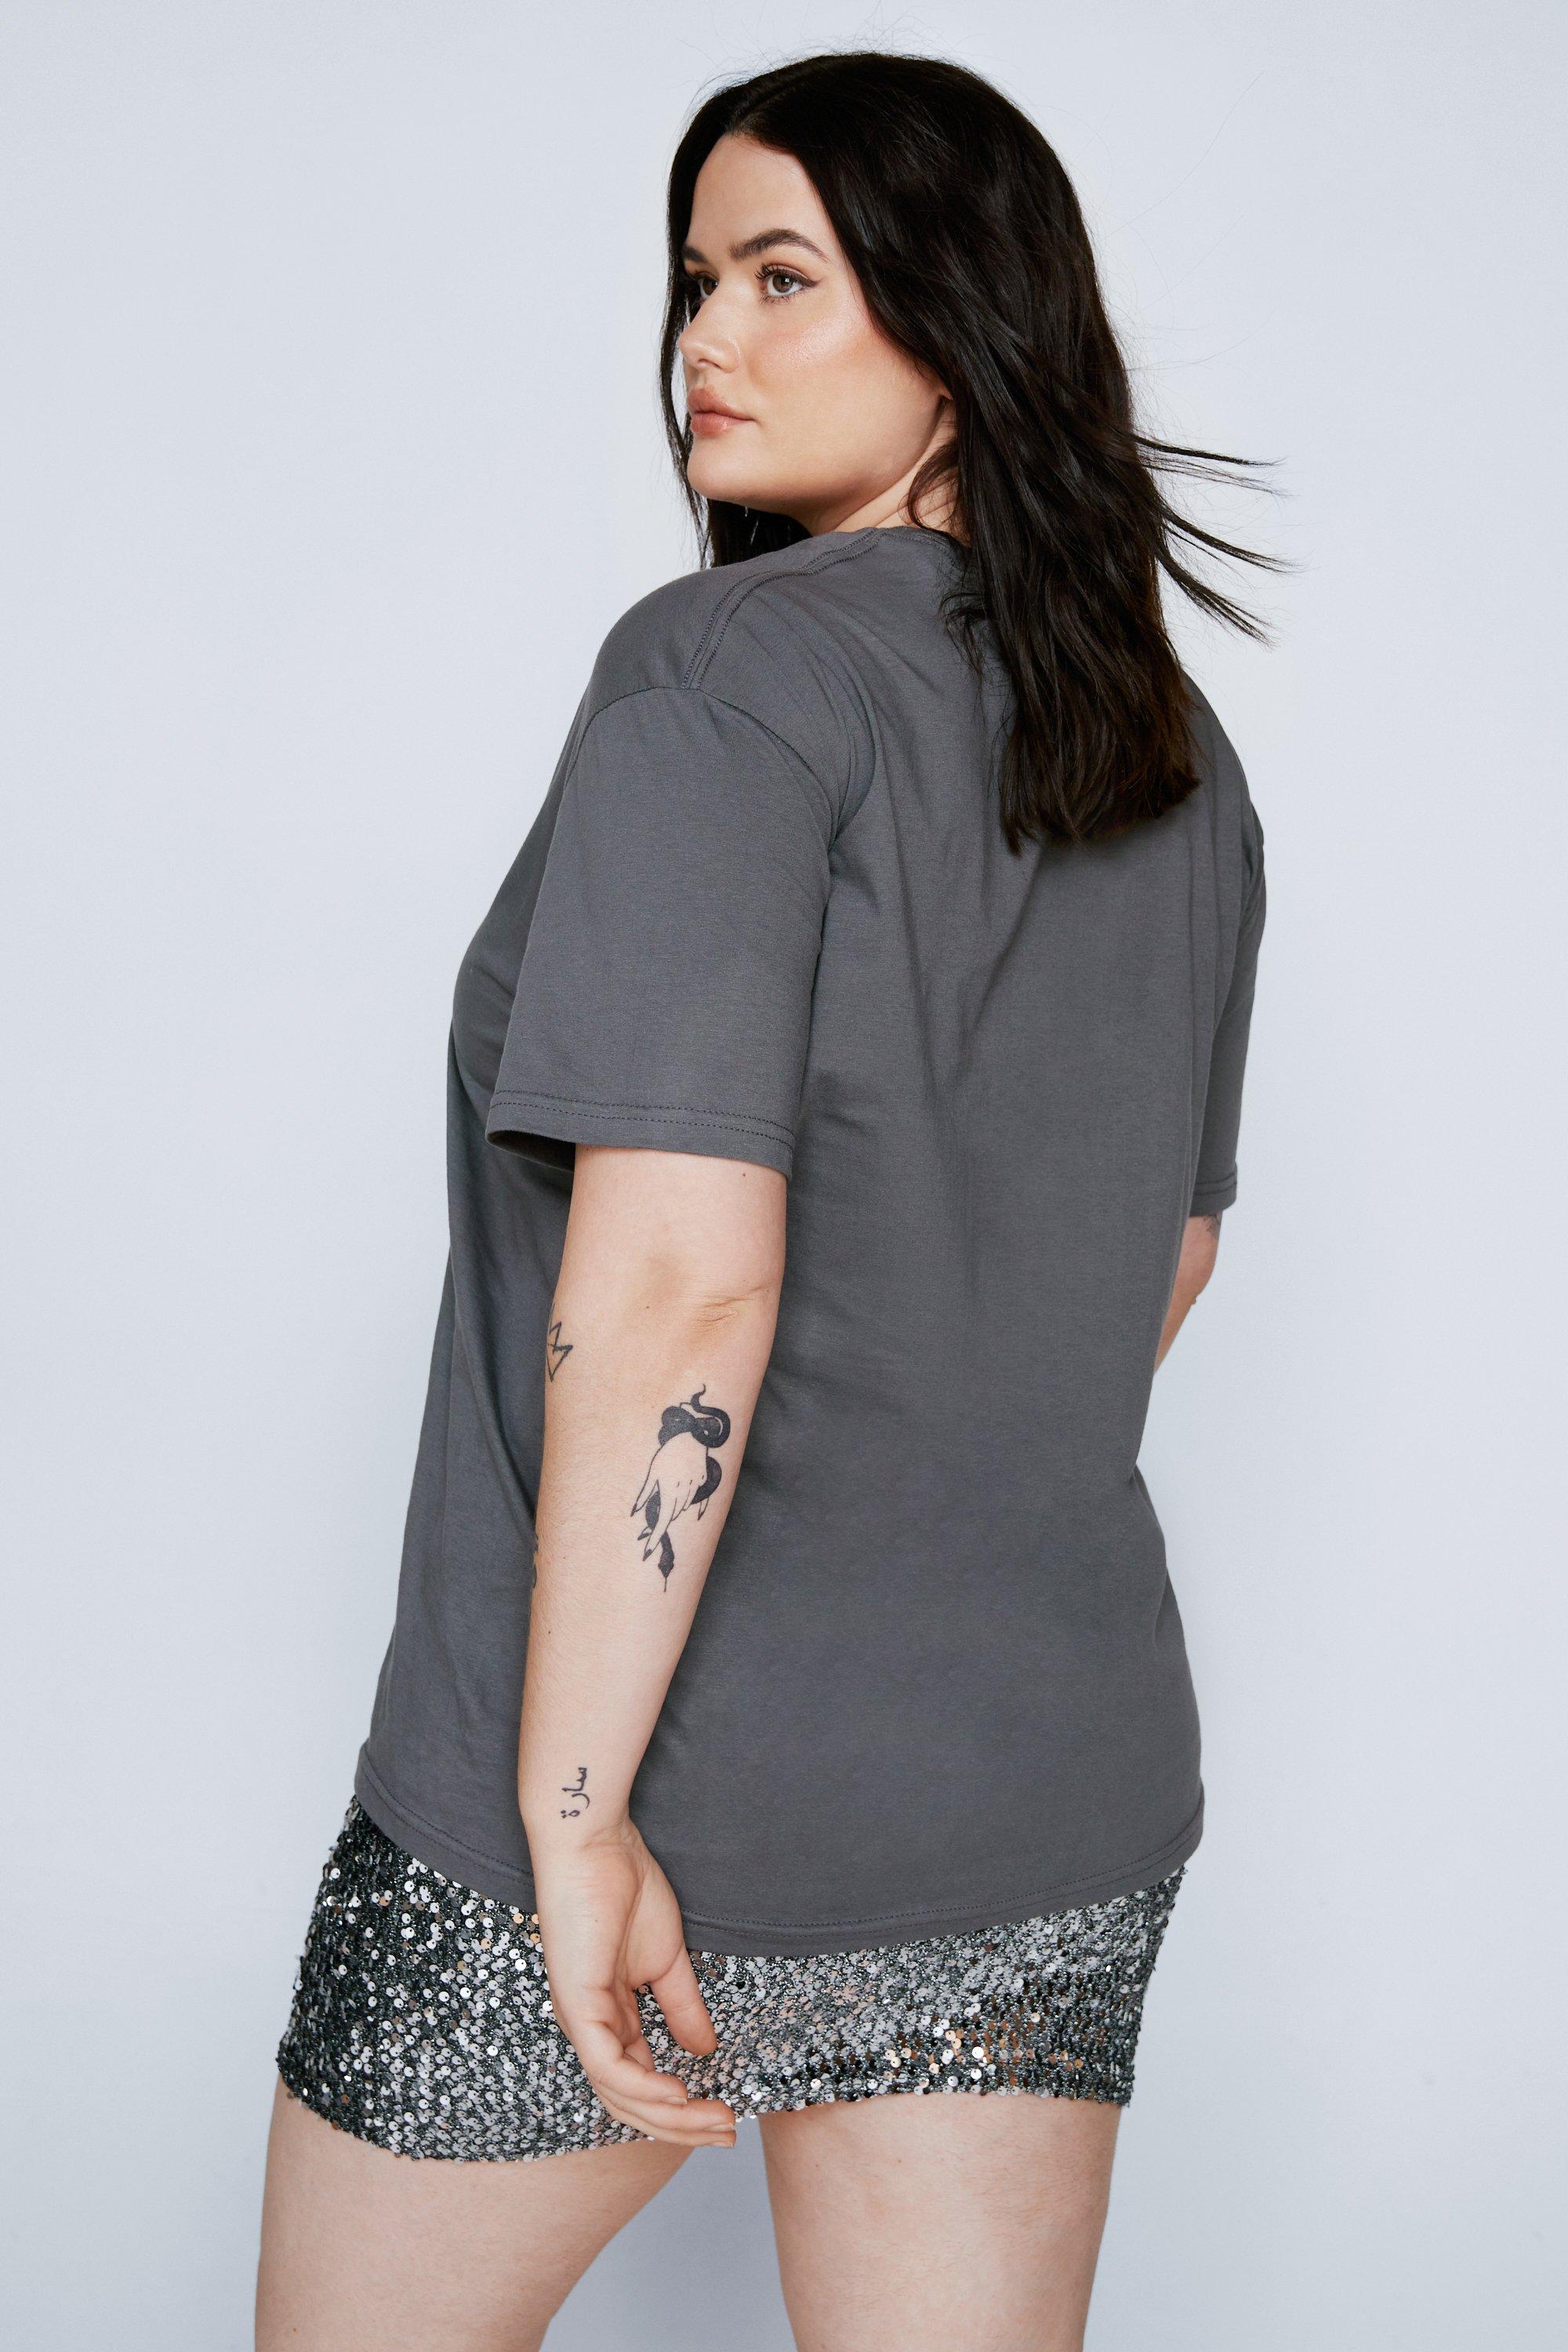 Plus Size Hole Graphic Band T-shirt Gal